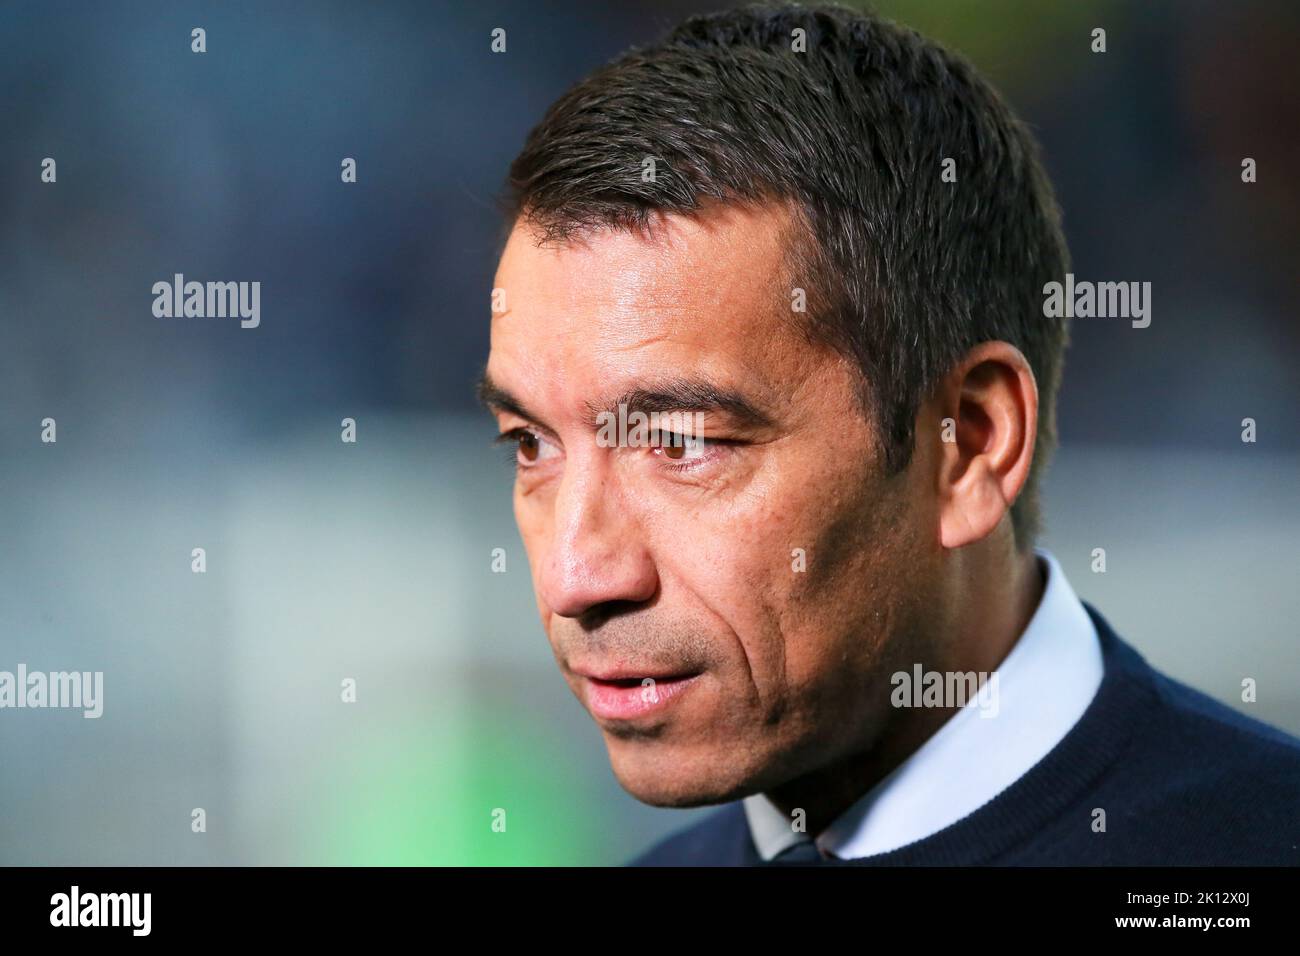 Giovanni Van Bronckhorst, manager of Rangers FC, being interviewed at Ibrox Park football stadium, Glasgow, Scotland before the UEFA Champions League Stock Photo